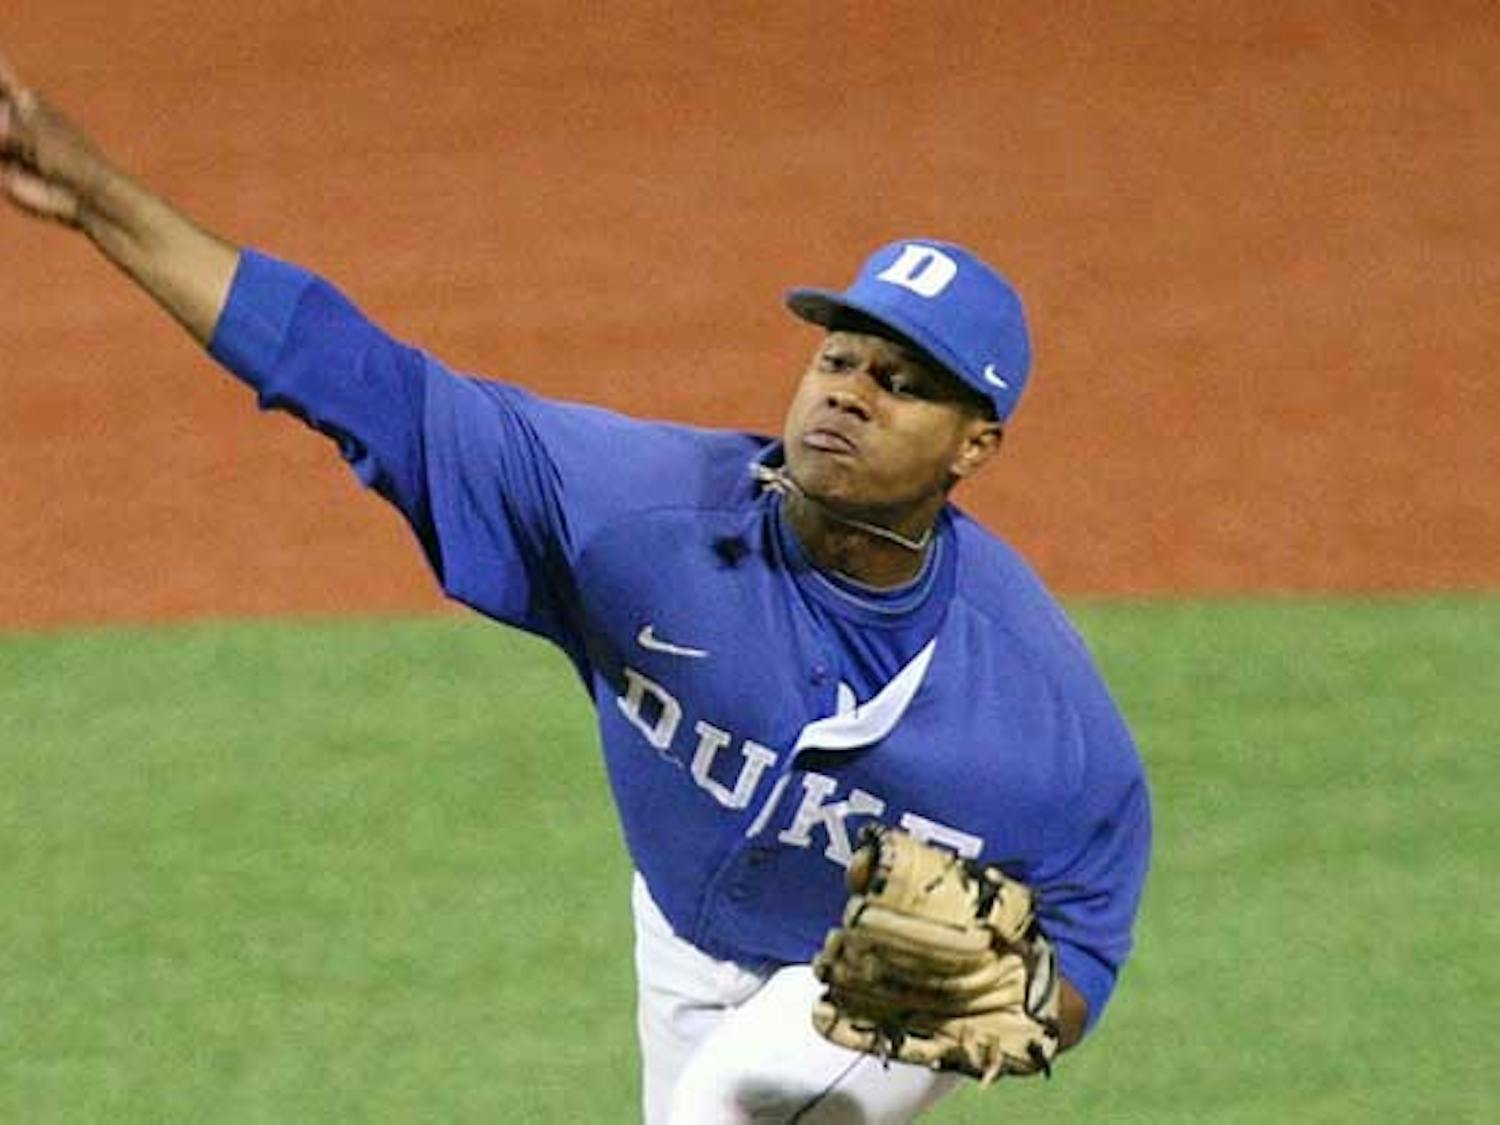 Marcus Stroman is pitching his way up MLB Draft boards this spring, recording 12.68 strikeouts per nine innings pitched and sporting a 2.05 ERA.